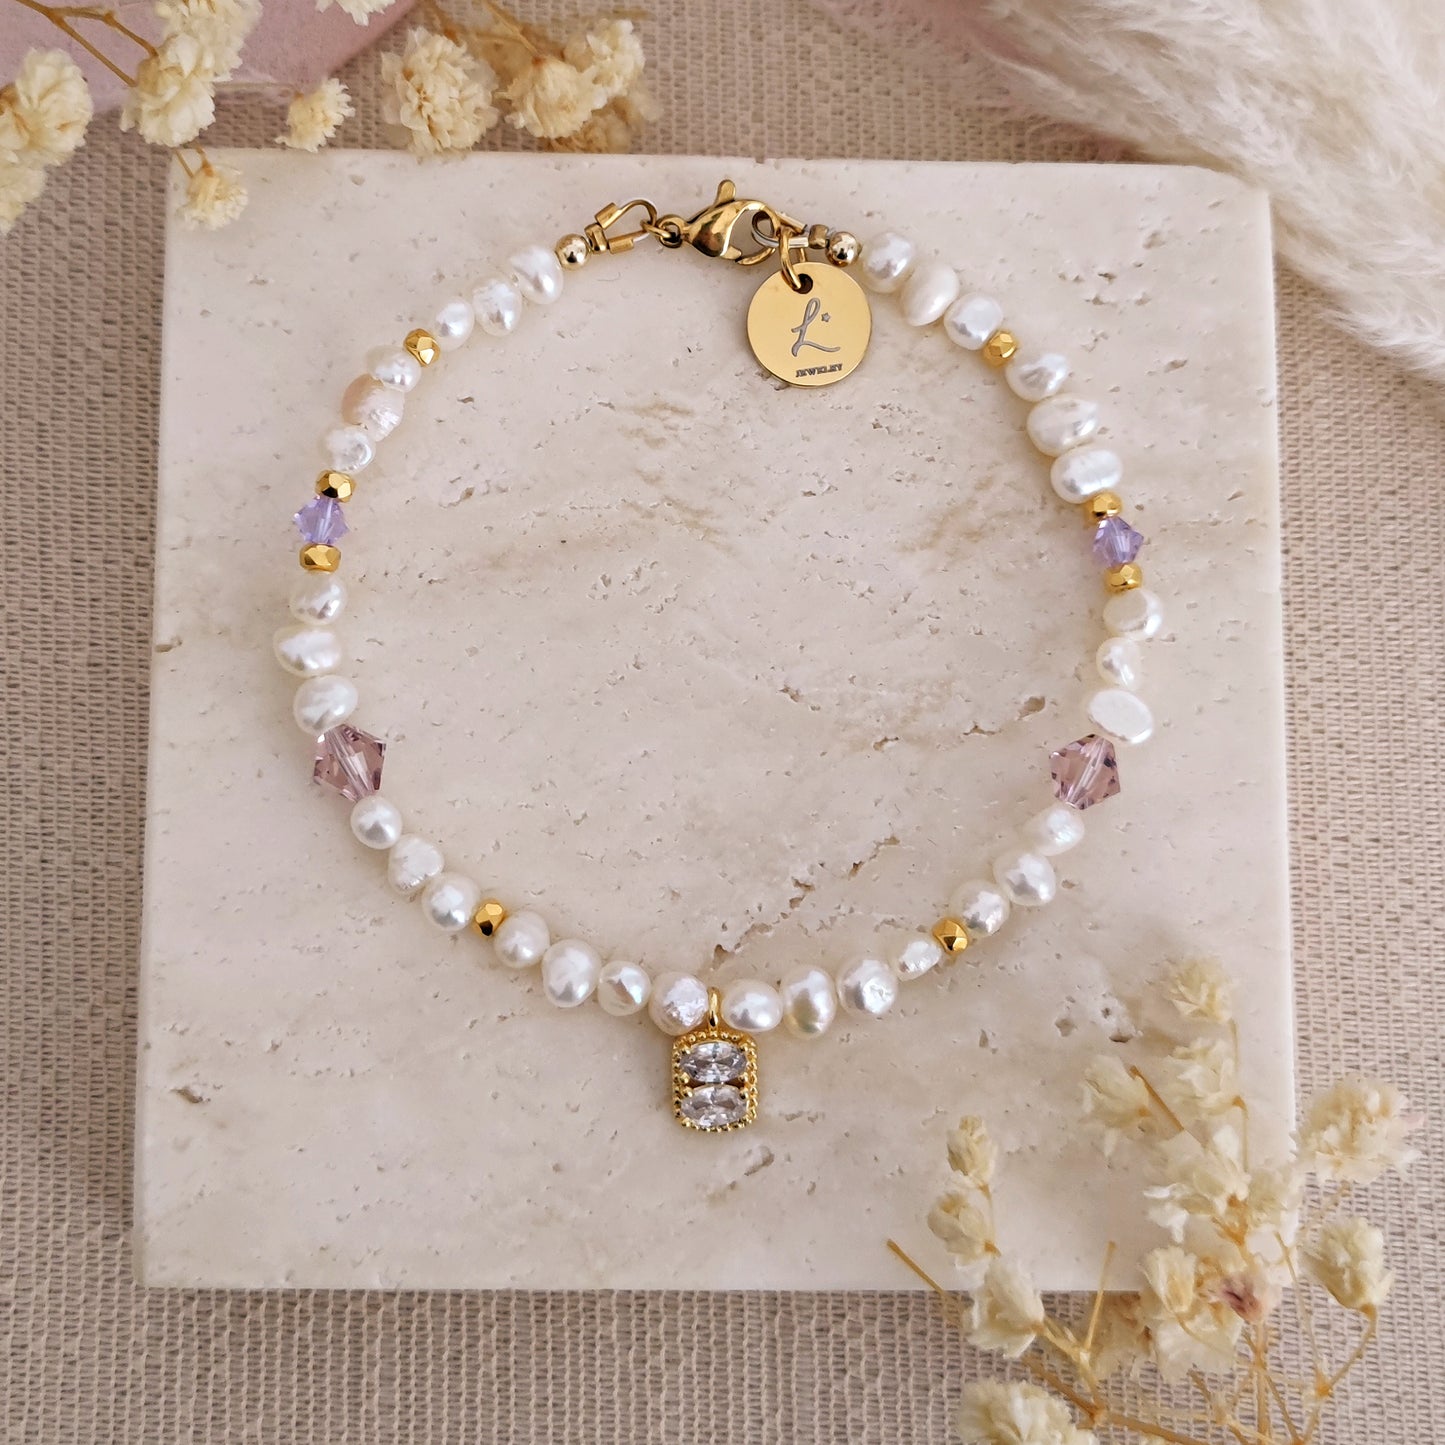 Bracelet with freshwater pearls, lilac crystals and cubic zirconia // SEBILLE